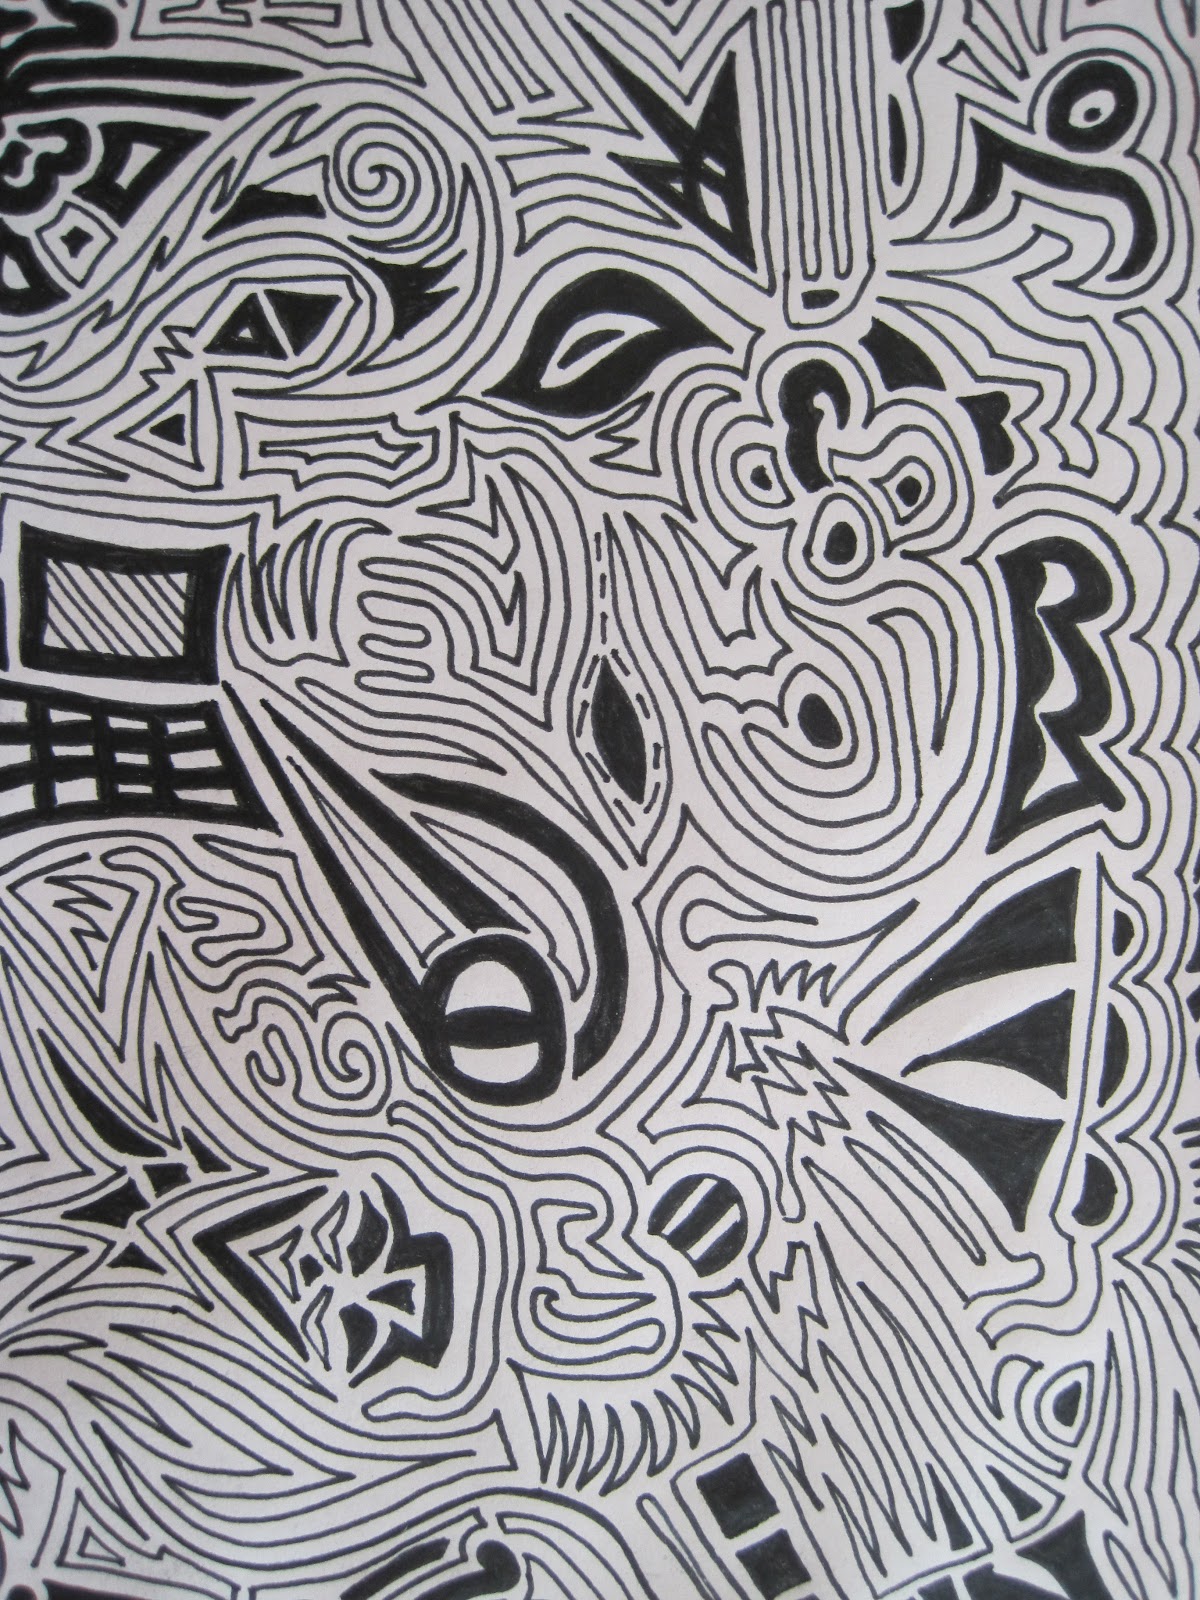 Doodle Nation: Just a snippet